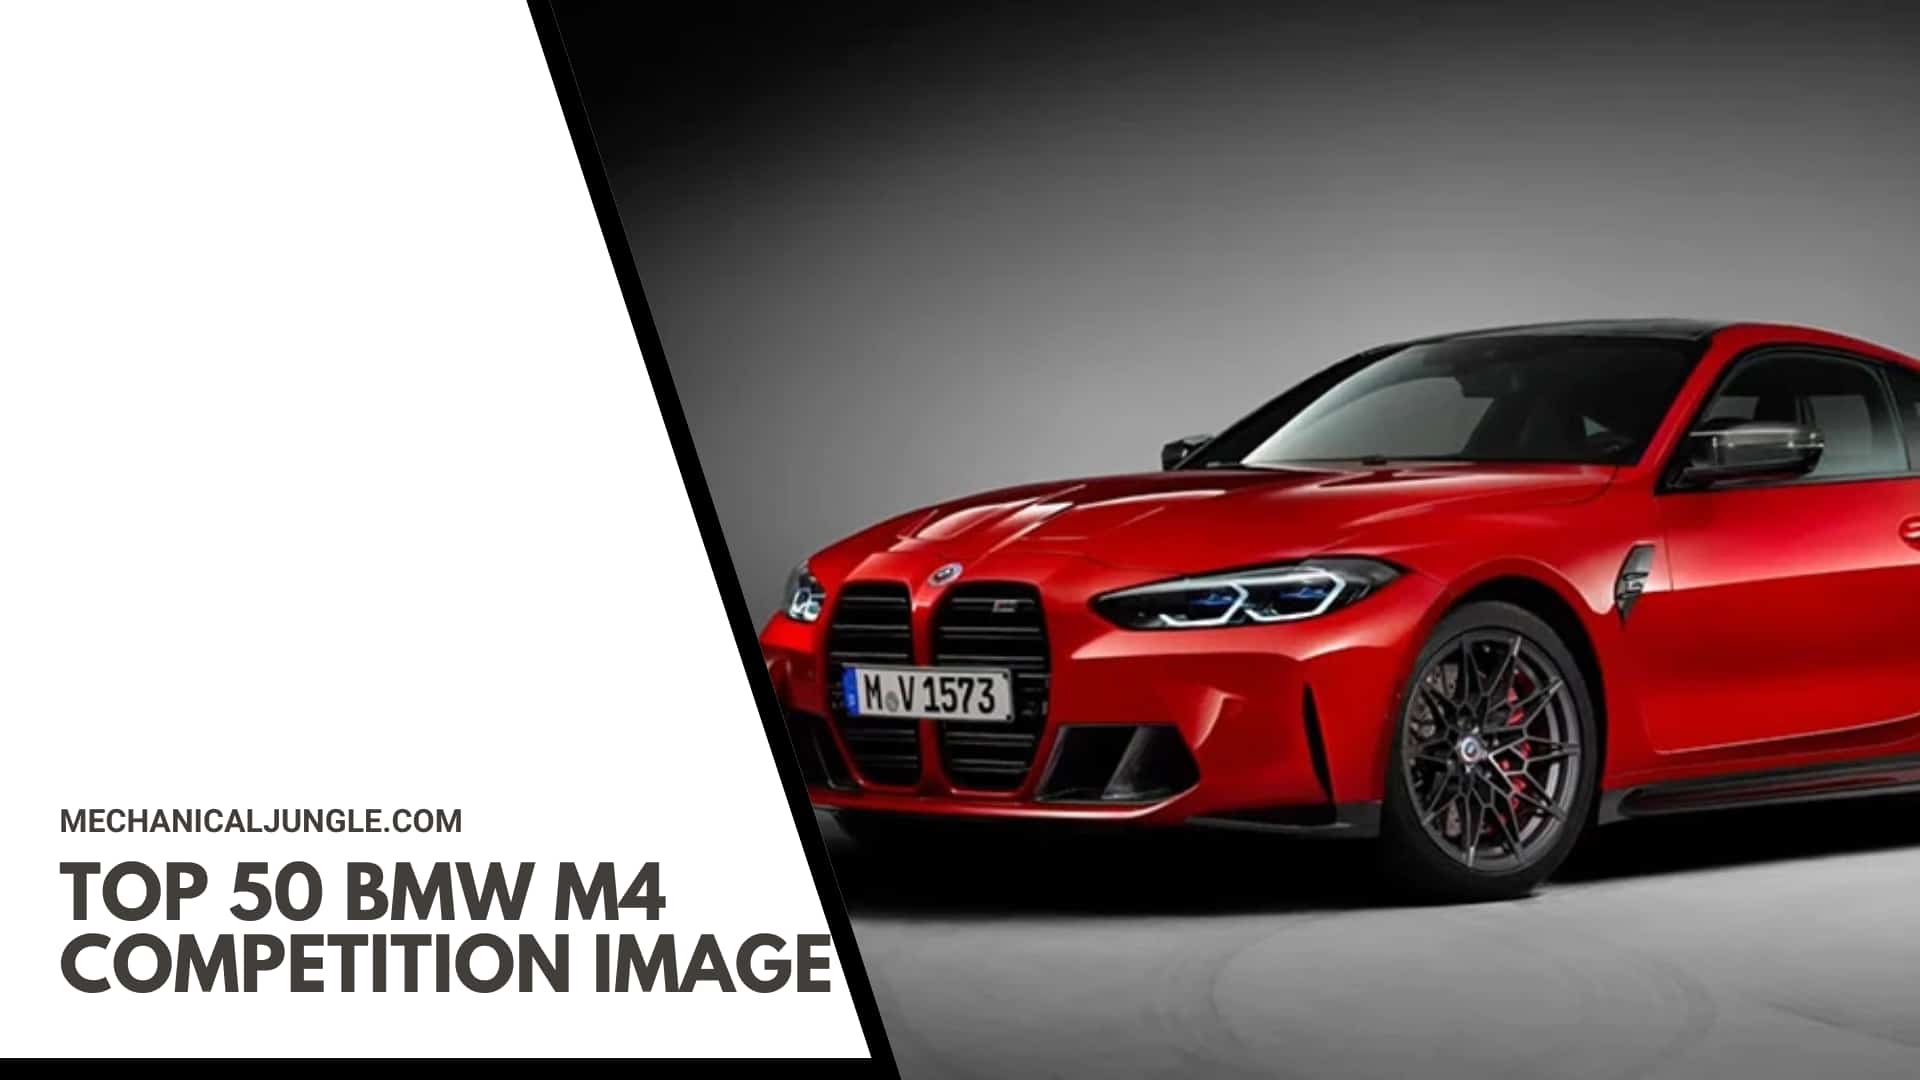 Top 50 BMW M4 Competition Image